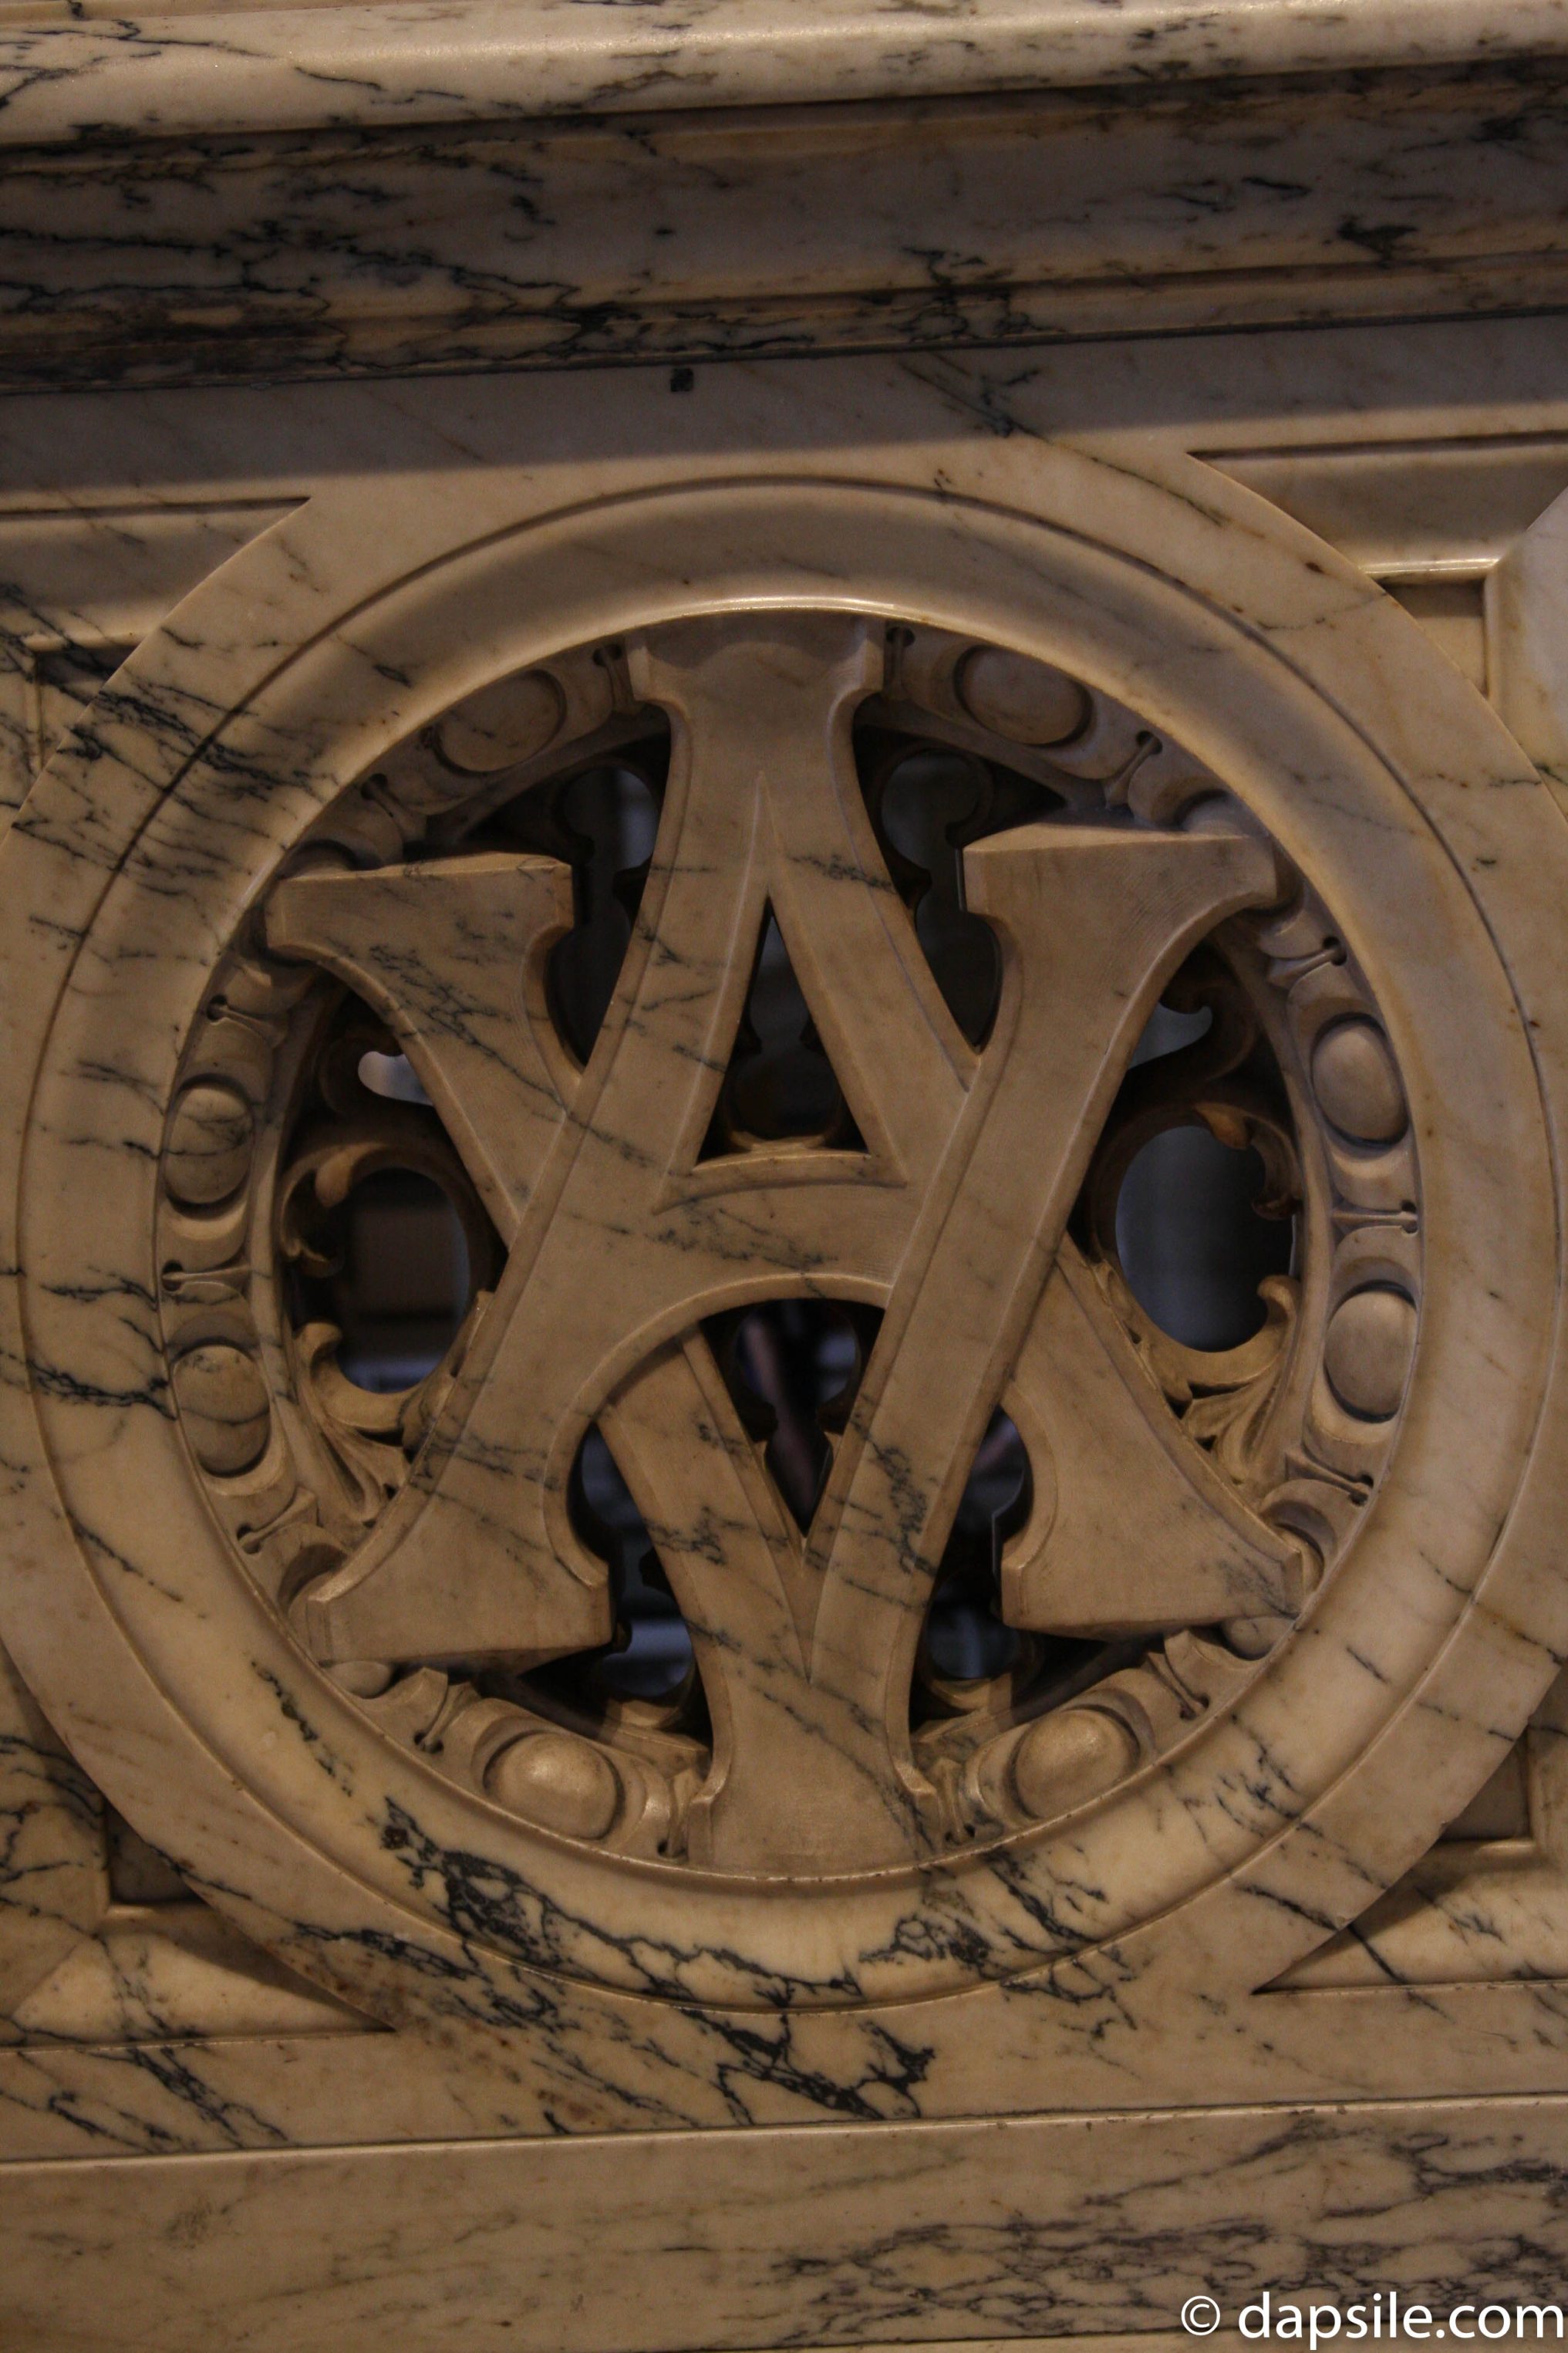 Carved V&A in the railing at the Victoria and Albert Museum in London